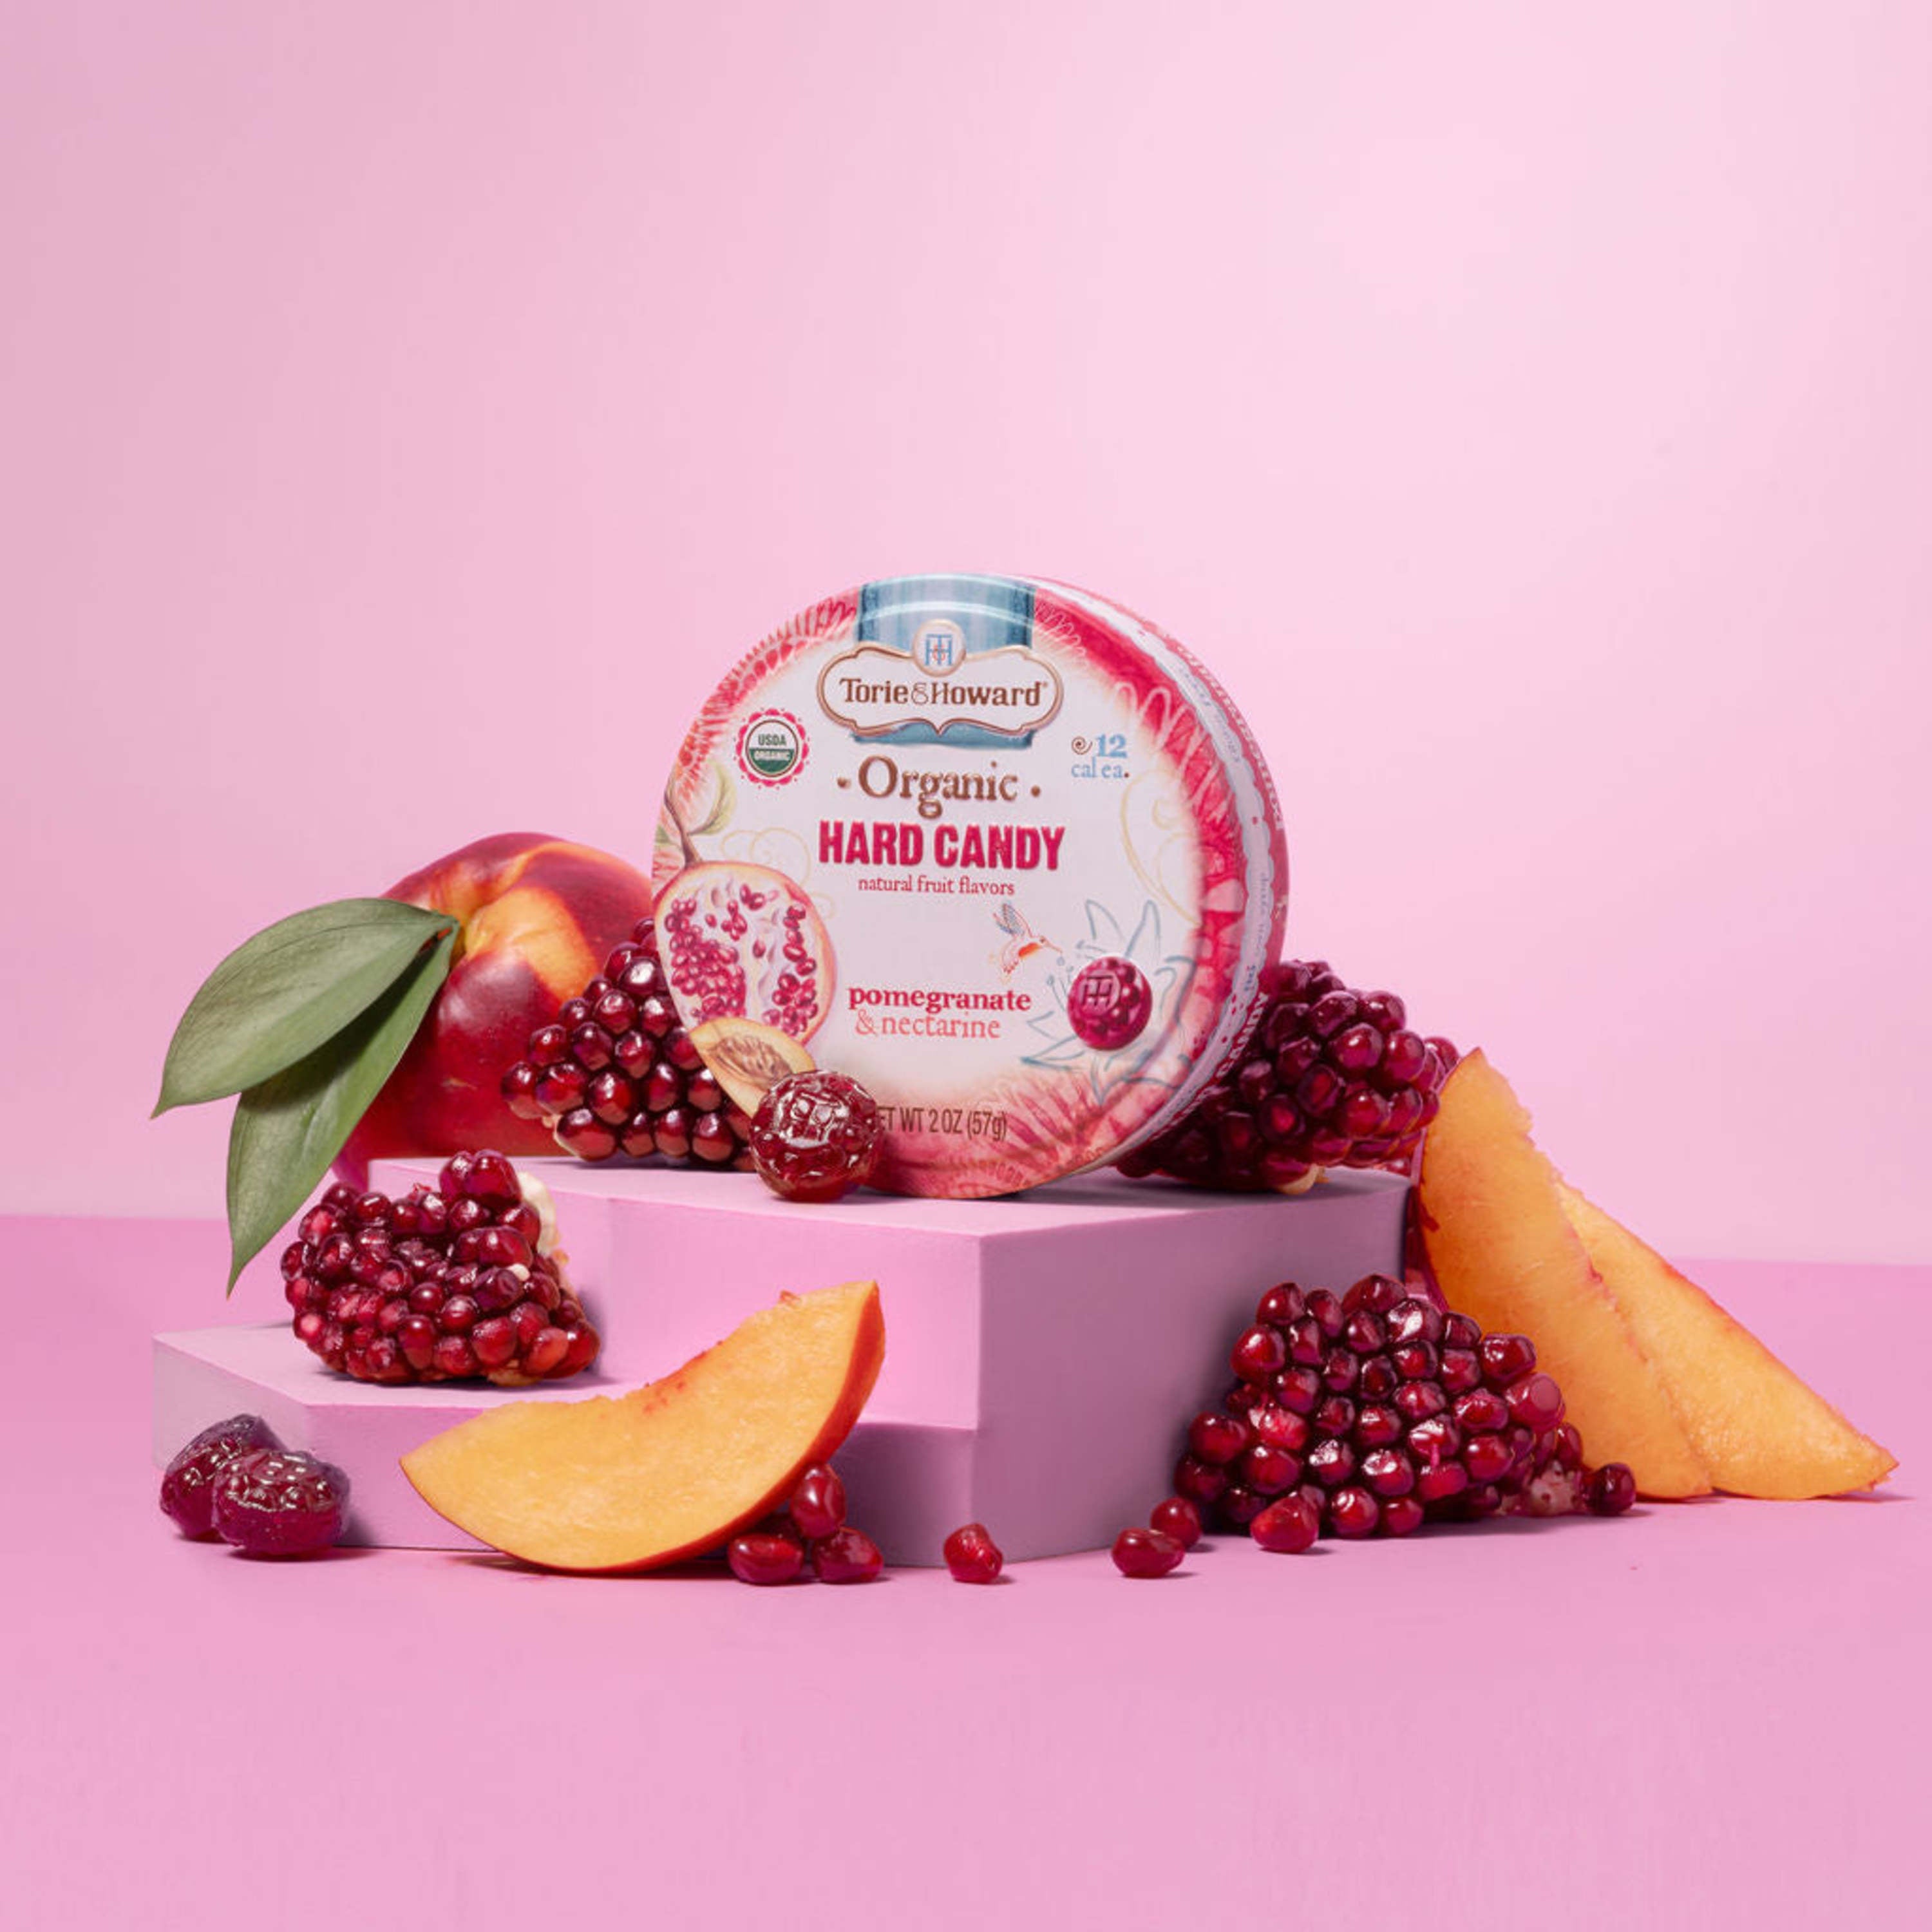 Torie & Howard Pomegranate & Nectarine Organic Hard Candy 2oz Tin surrounded by fresh fruit and candy pieces